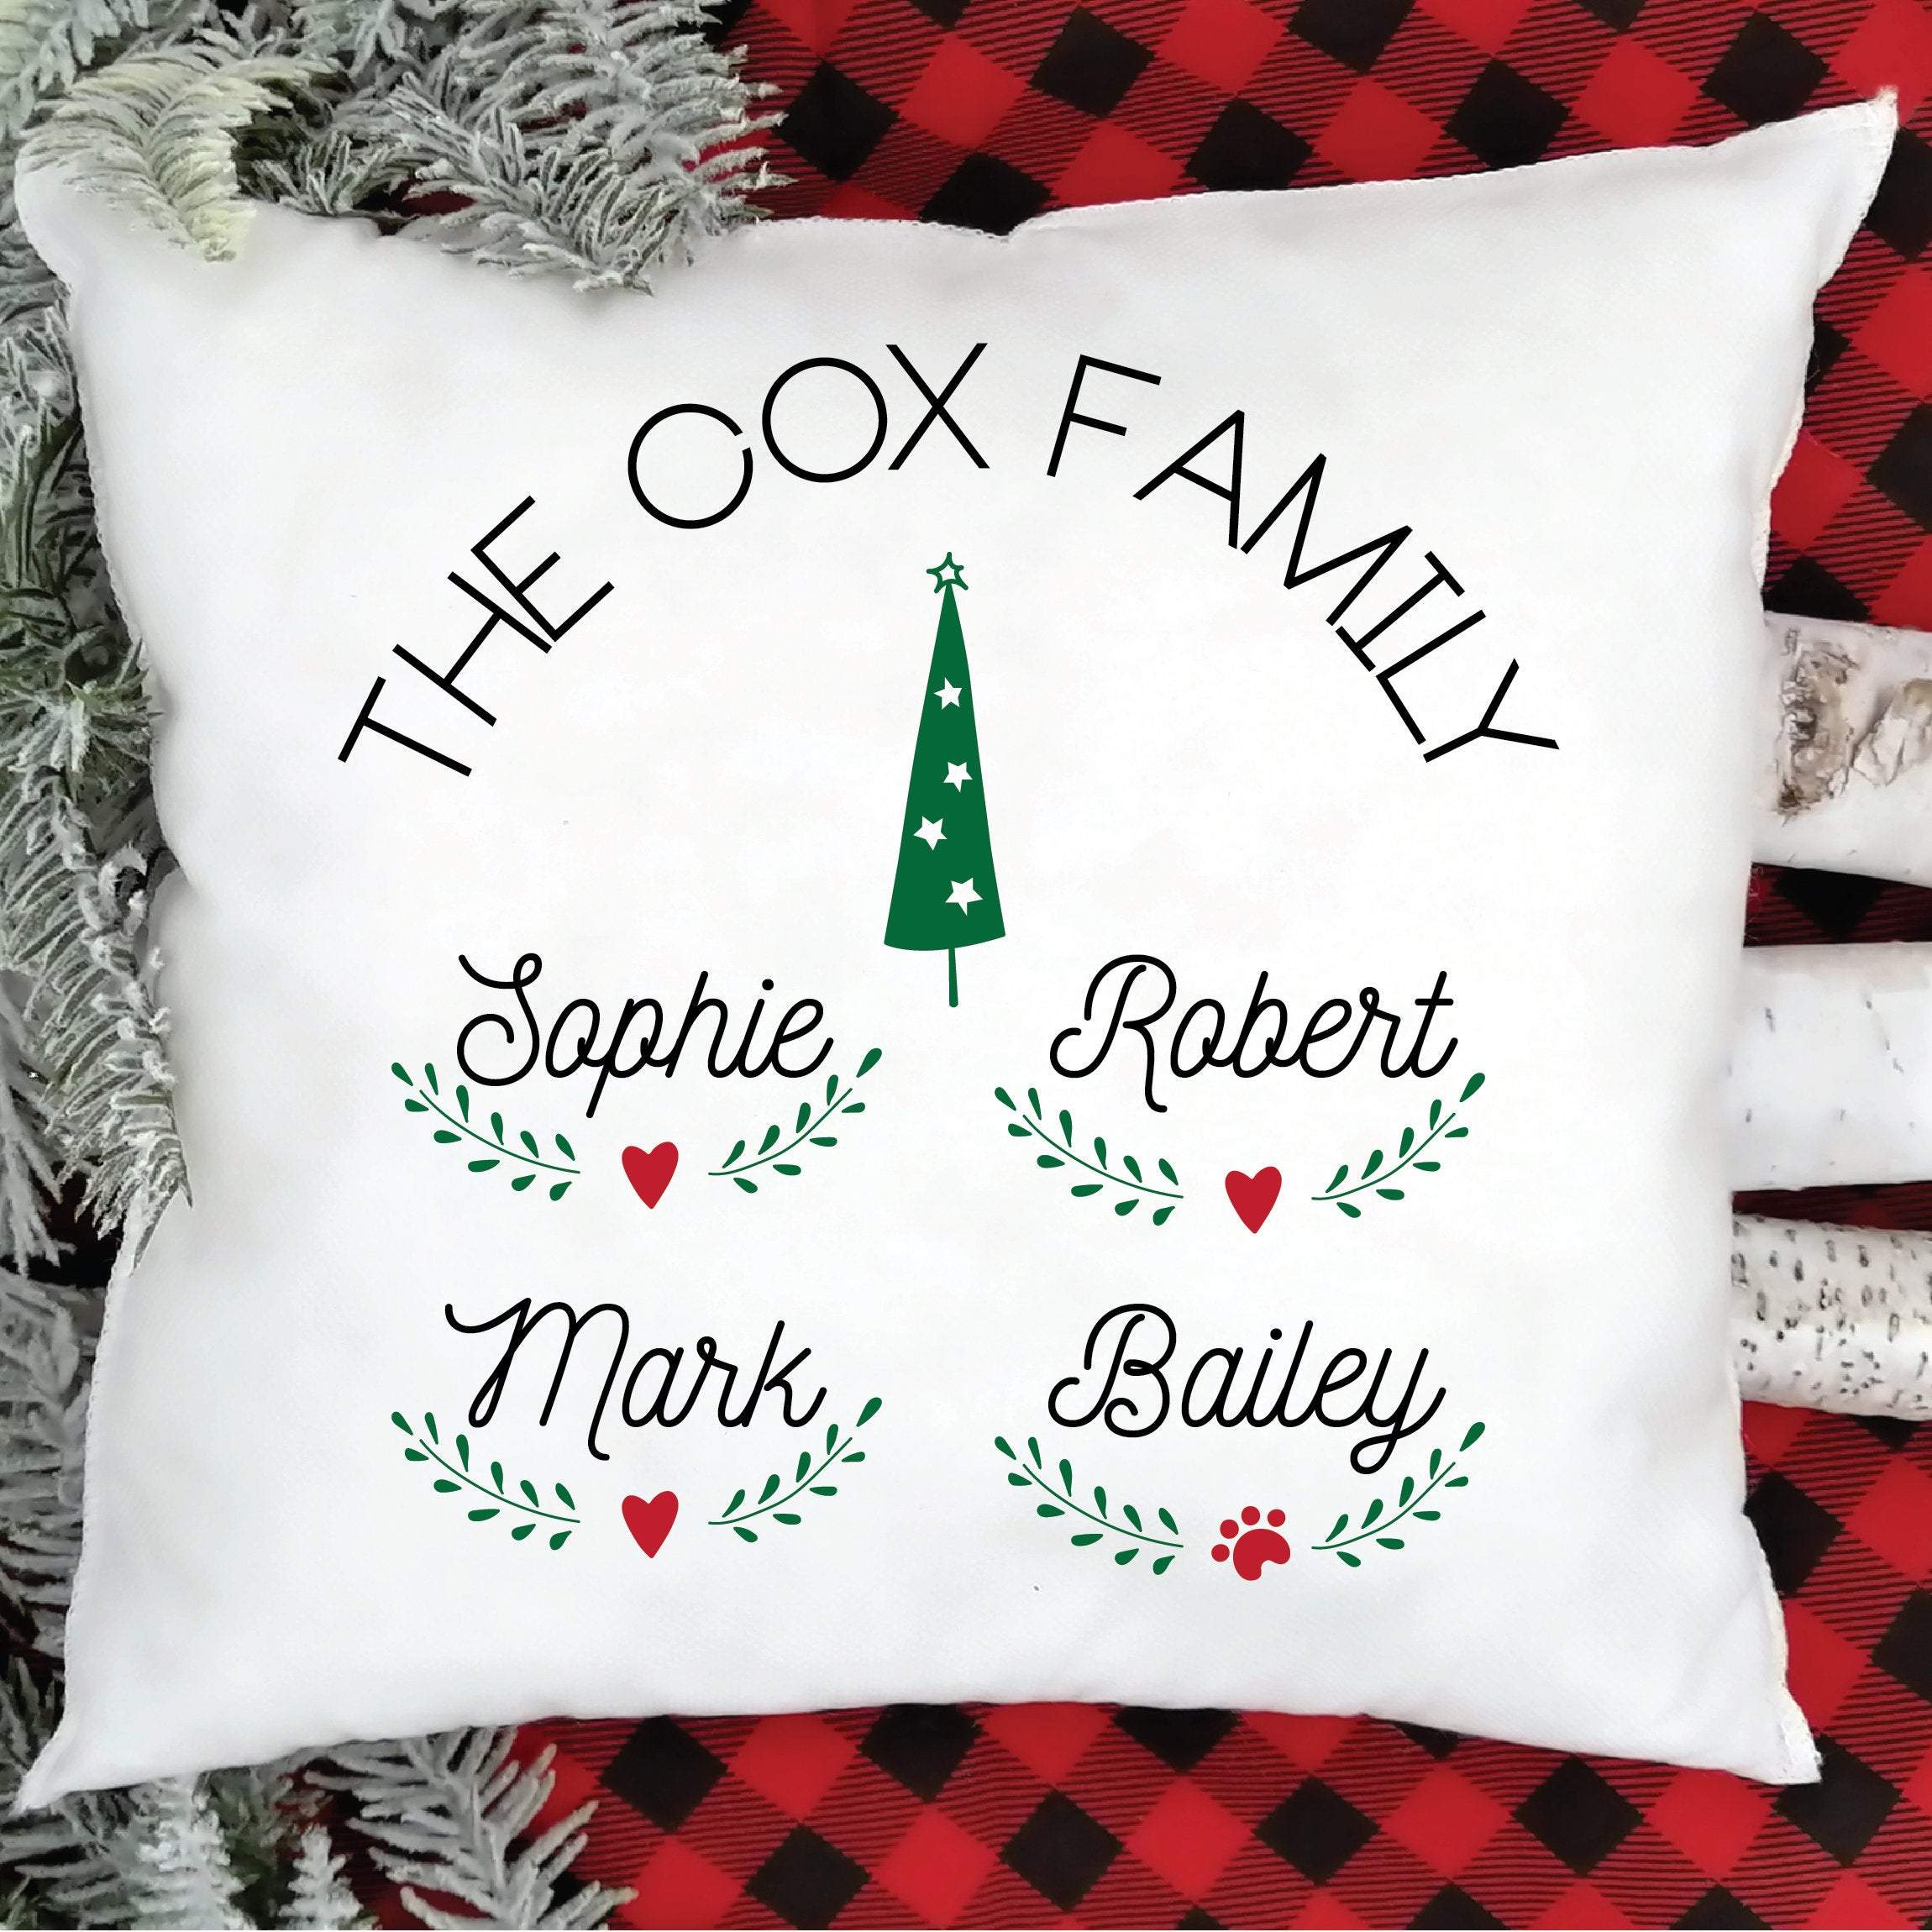 Personalised Family Christmas cushion cover with heart and paw prints, Xmas 2020 decorations